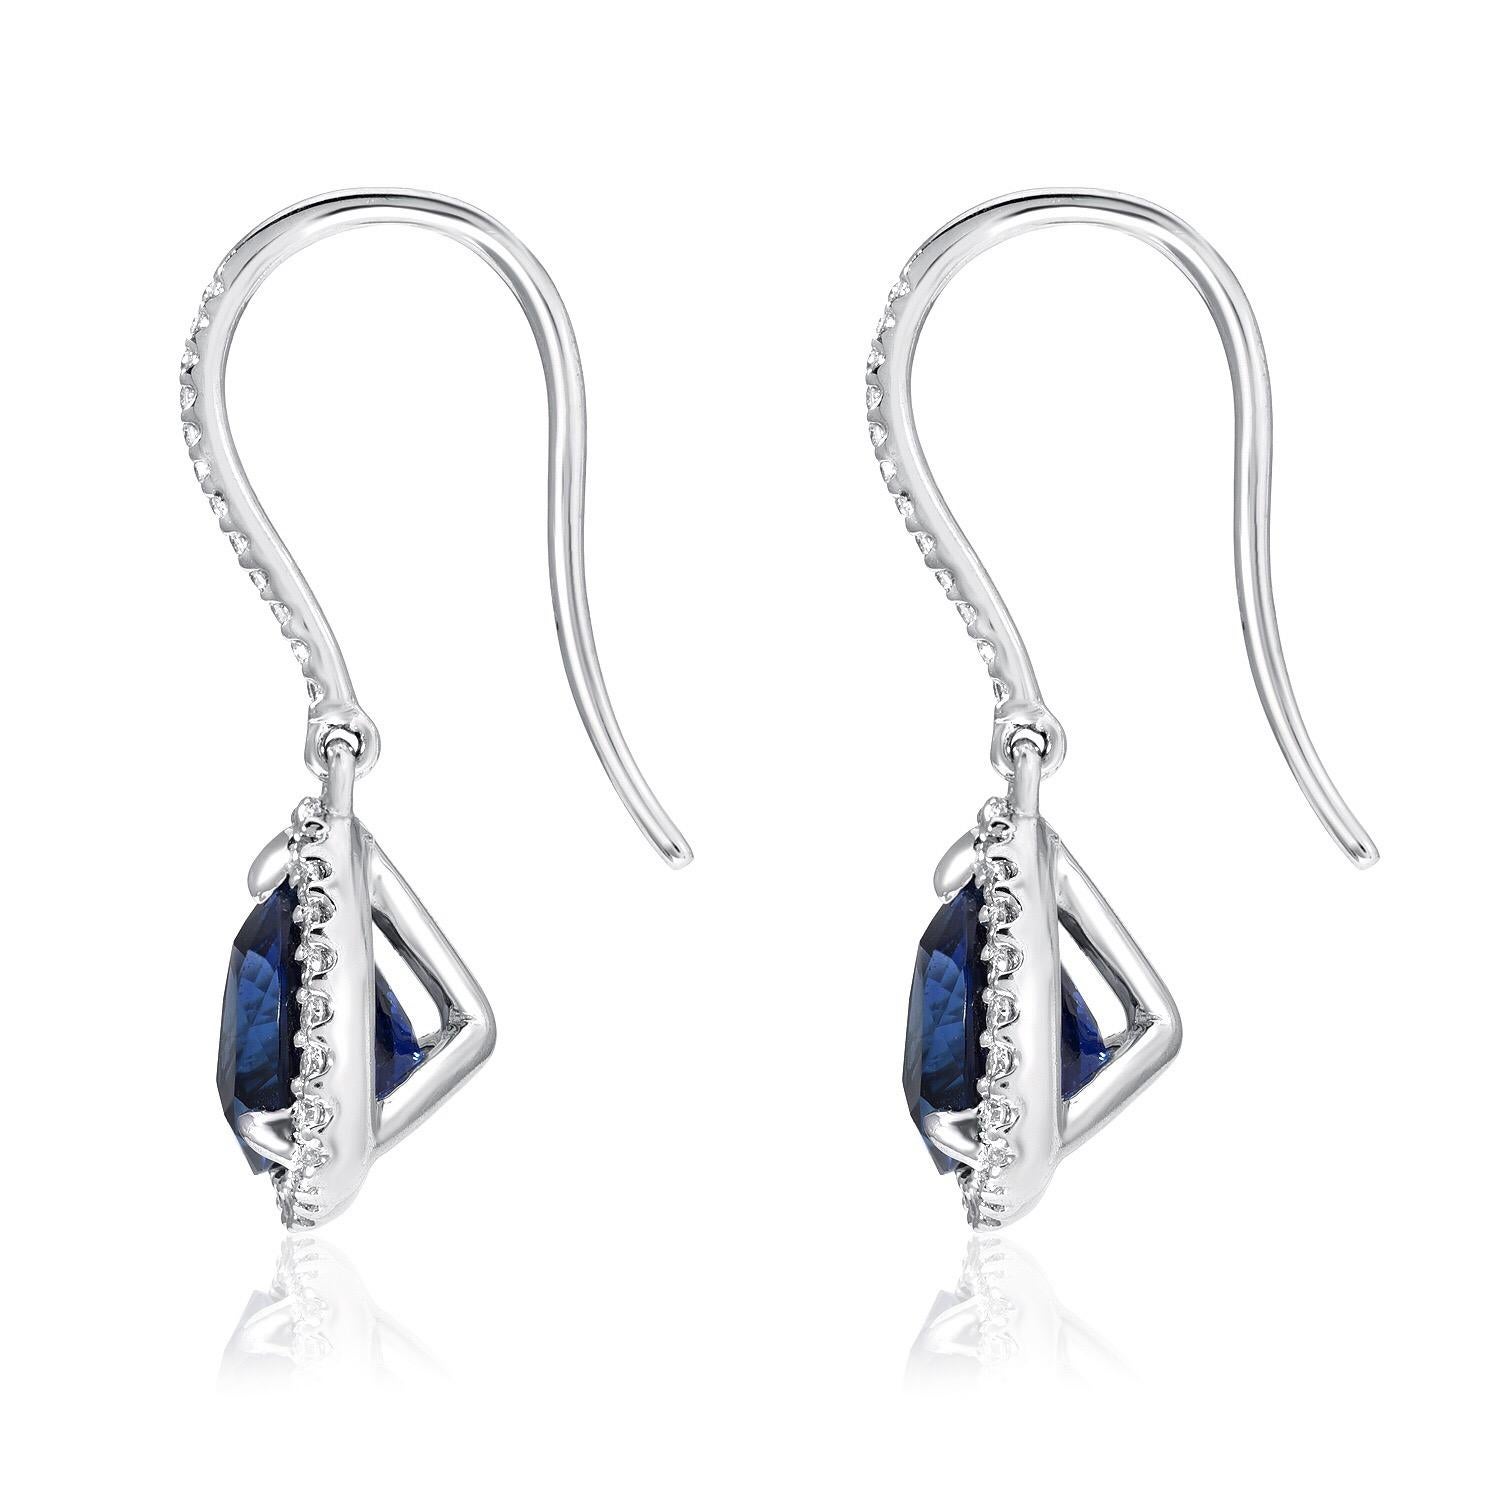 Sapphire earrings, featuring a pair of trillion shaped blue Sapphires weighing a total of 3.14 carats and adorned by a total of 0.23 carats of round brilliant diamonds. Crafted in 18K white gold.
Total length: 0.75 inches.
Returns are accepted and